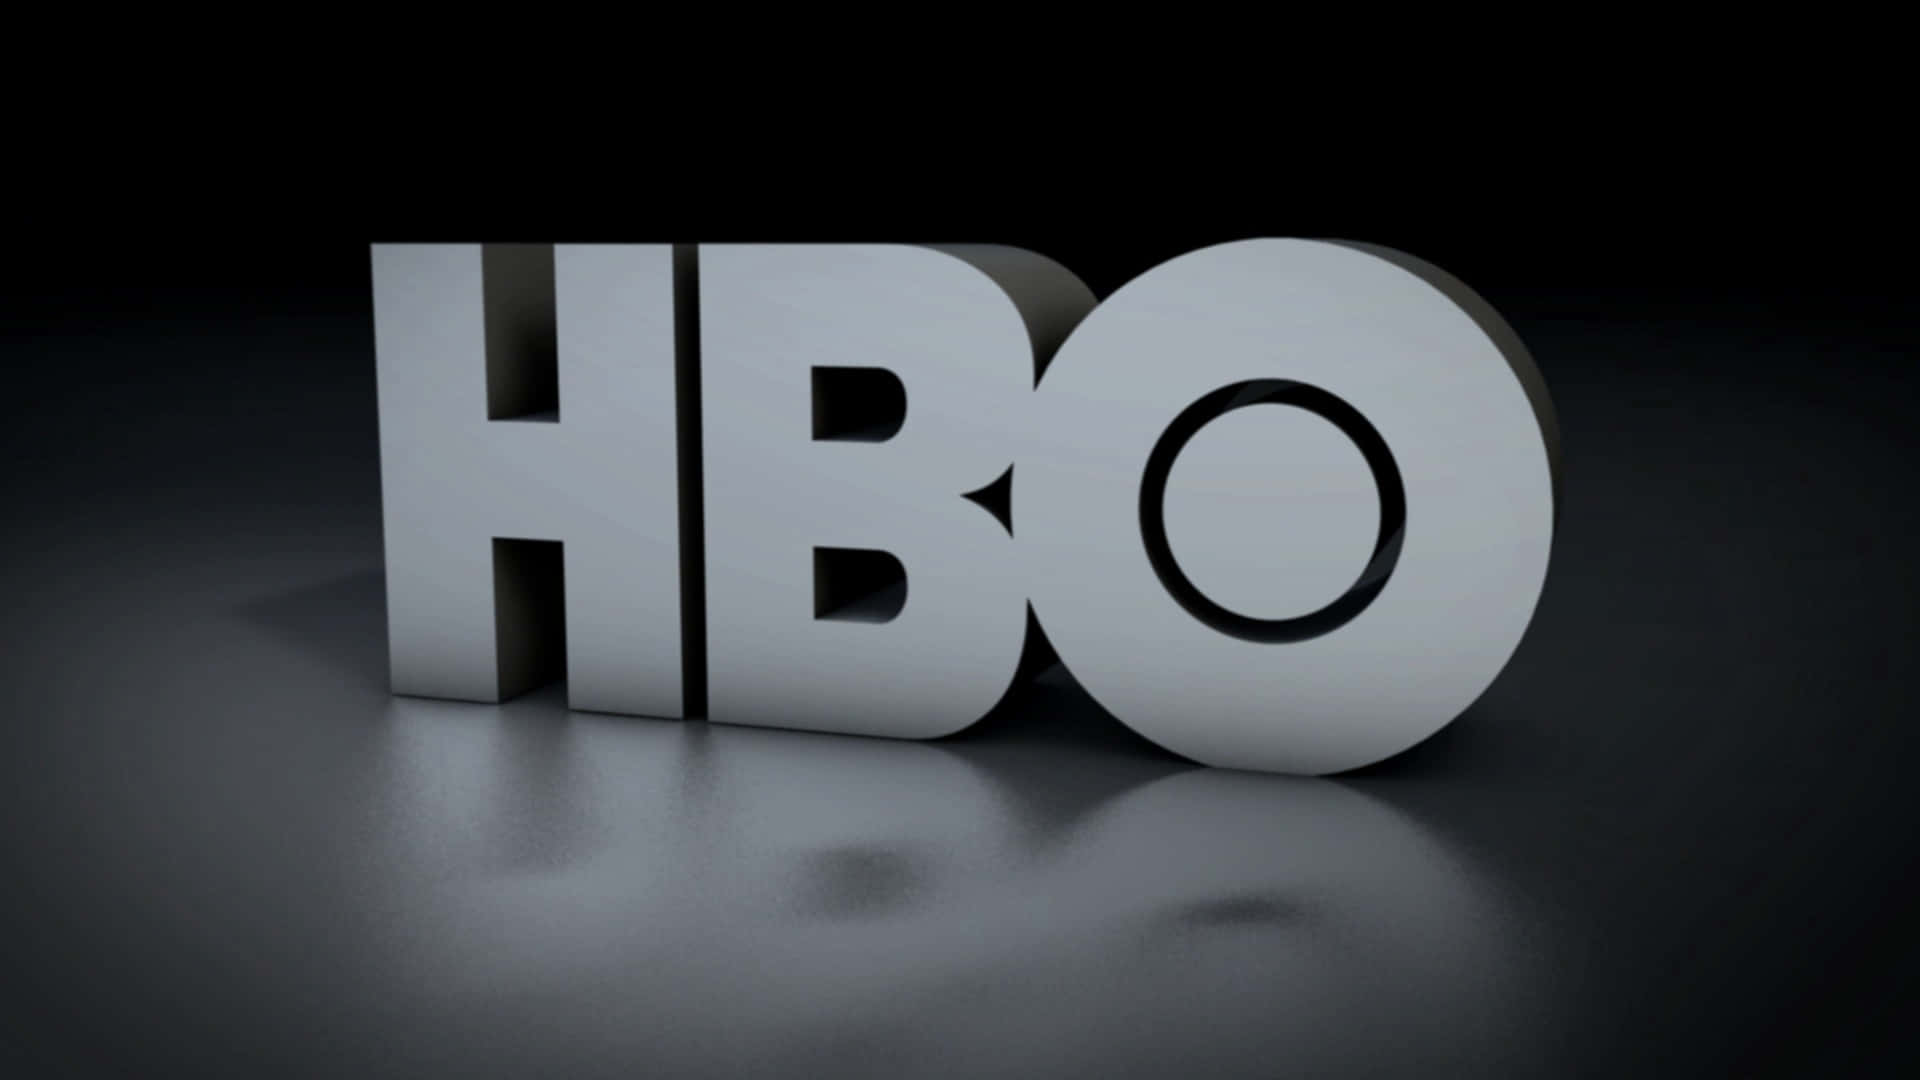 Download Hbo Logo On A Black Background | Wallpapers.com